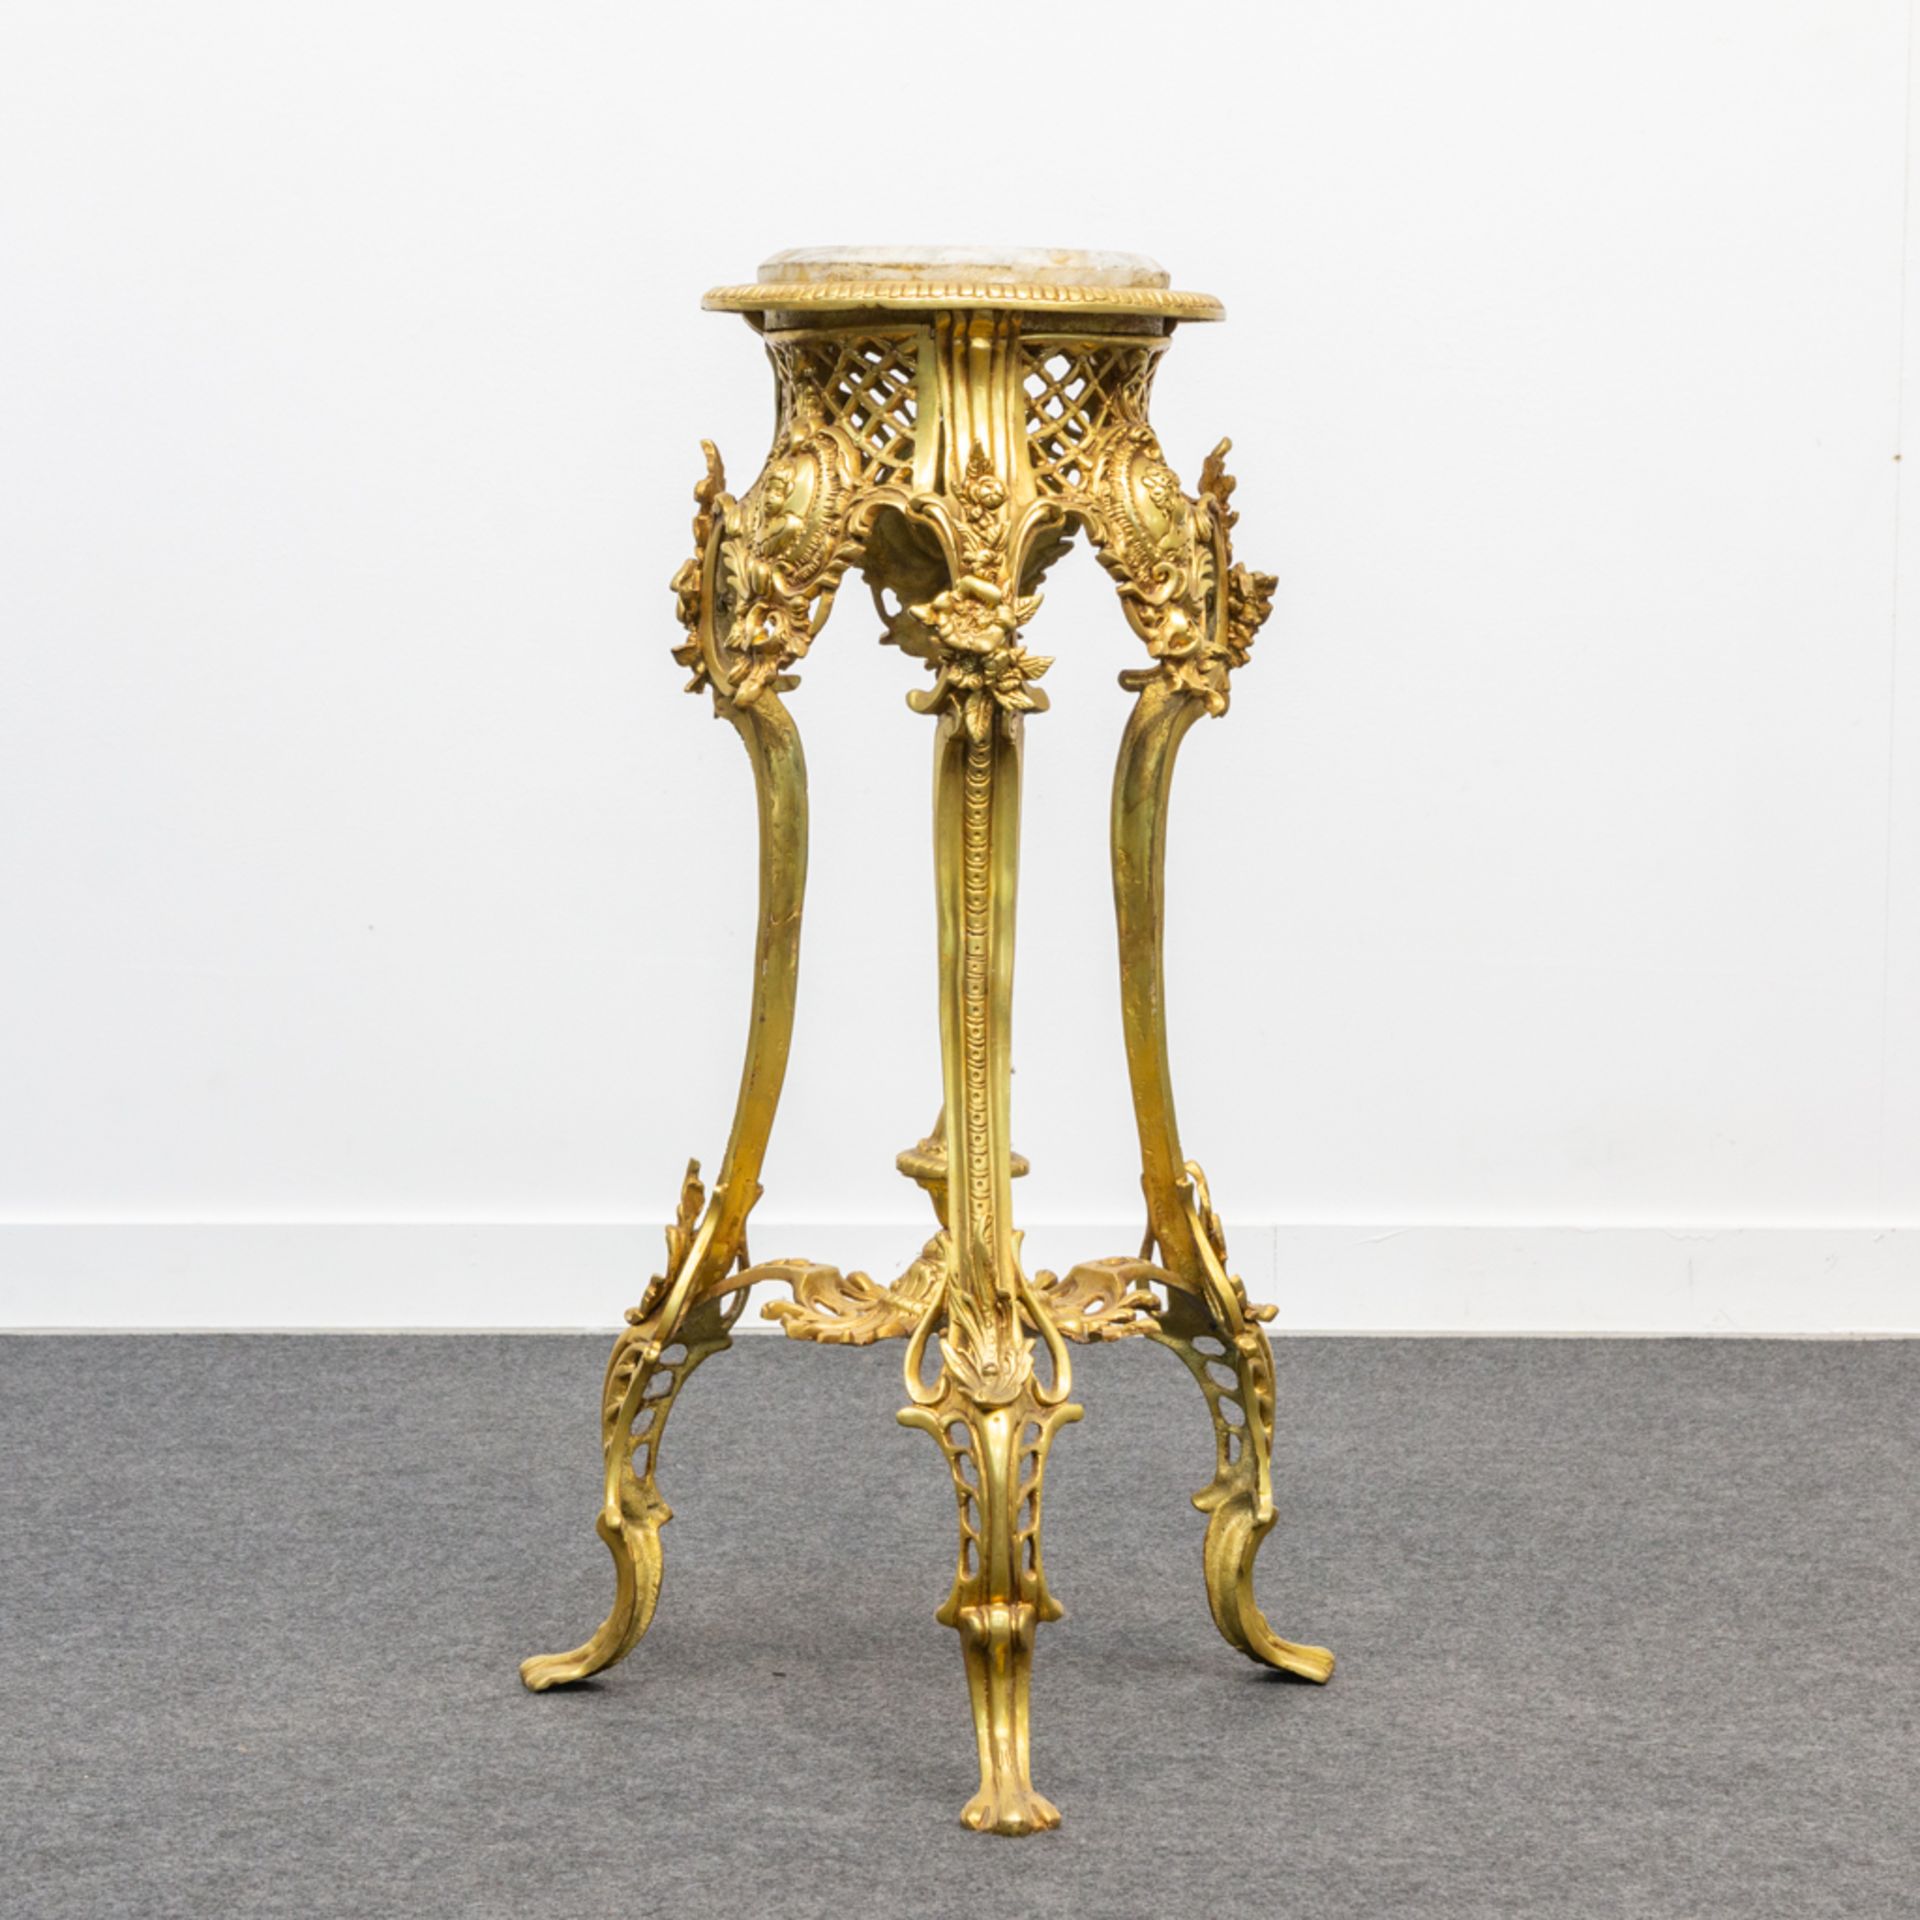 A side table in rococo style, made of bronze with a marble top. The second half of the 20th century.